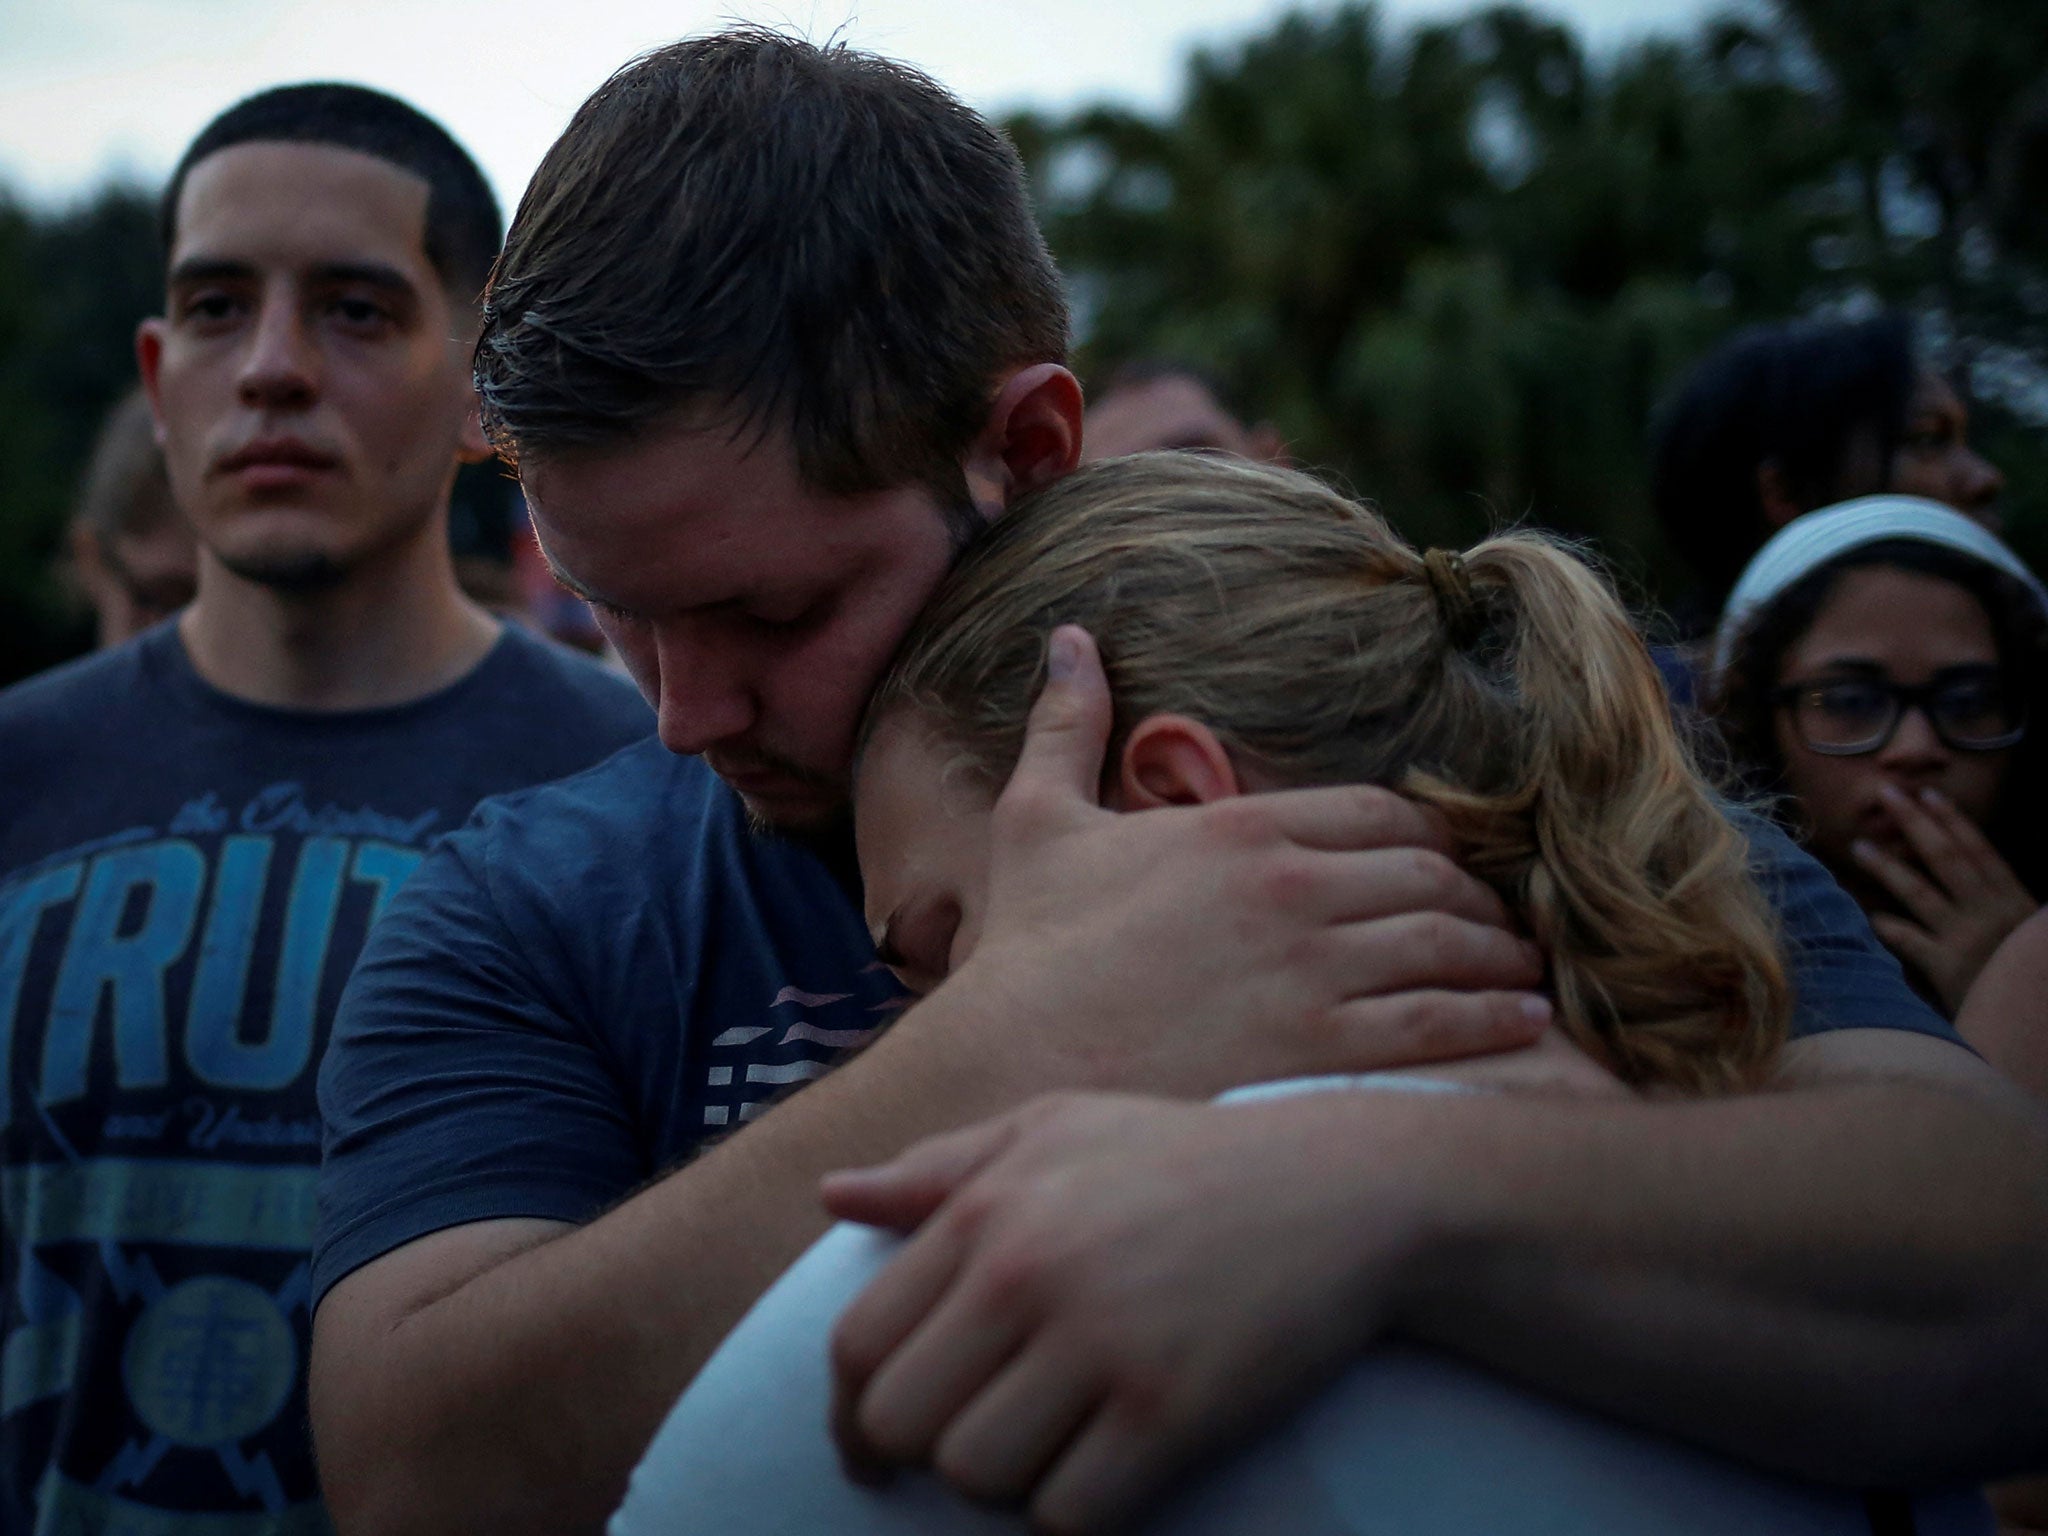 Savannah is embraced by her friend Ricky during a vigil to commemorate victims of a mass shooting at the Pulse gay night club in Orlando, Florida, June 12, 2016. Savannah said she lost a friend in the shooting